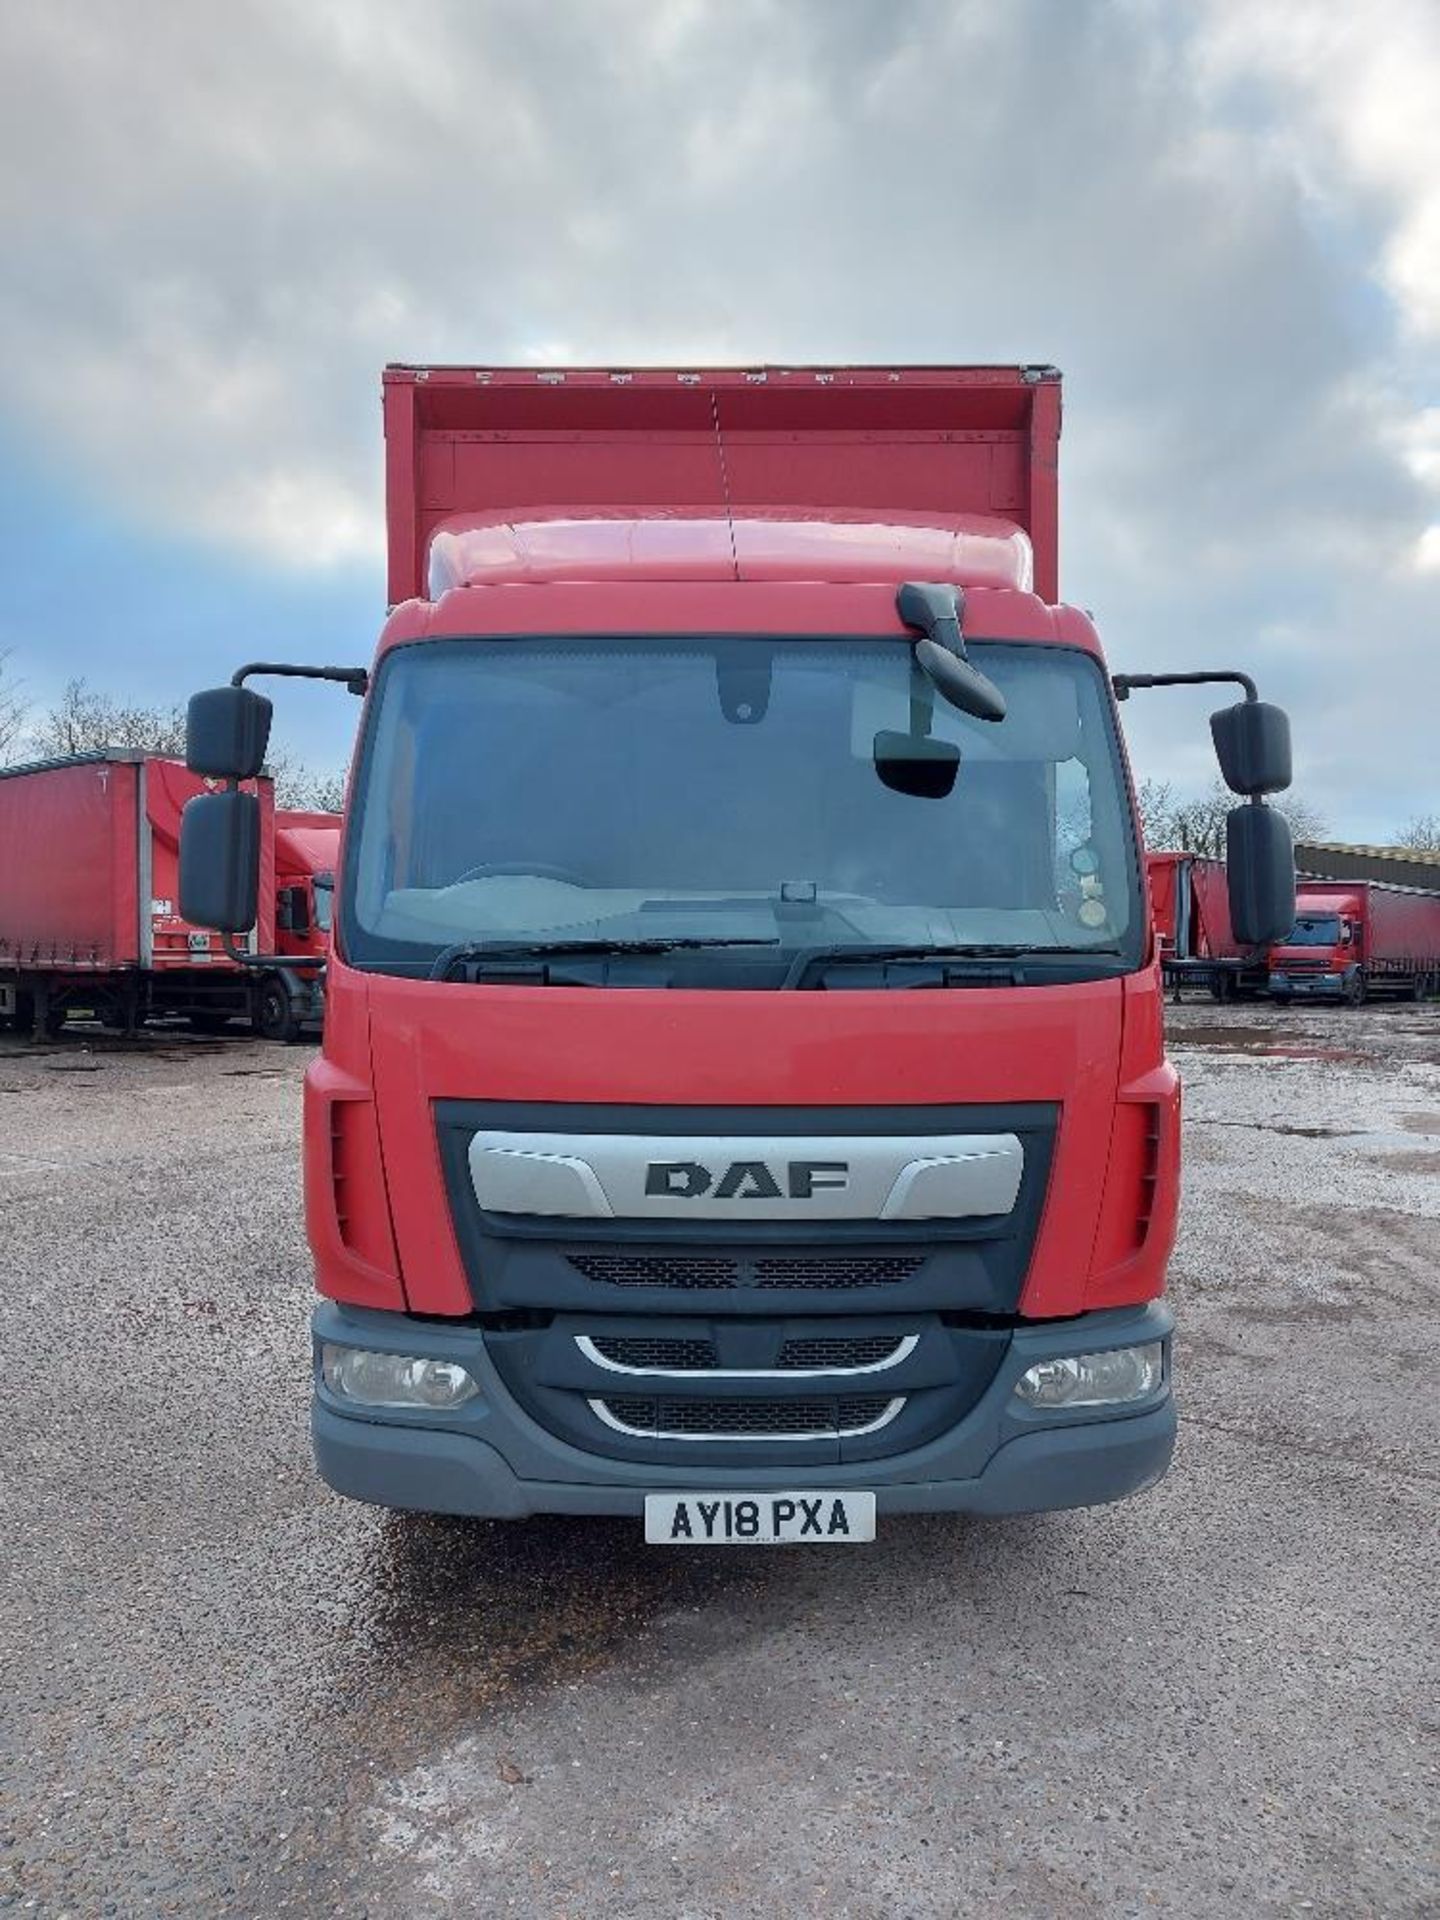 DAF LF 230 4x2 Rigid 12T Curtain Side Lorry with Tail Lift - Image 3 of 10